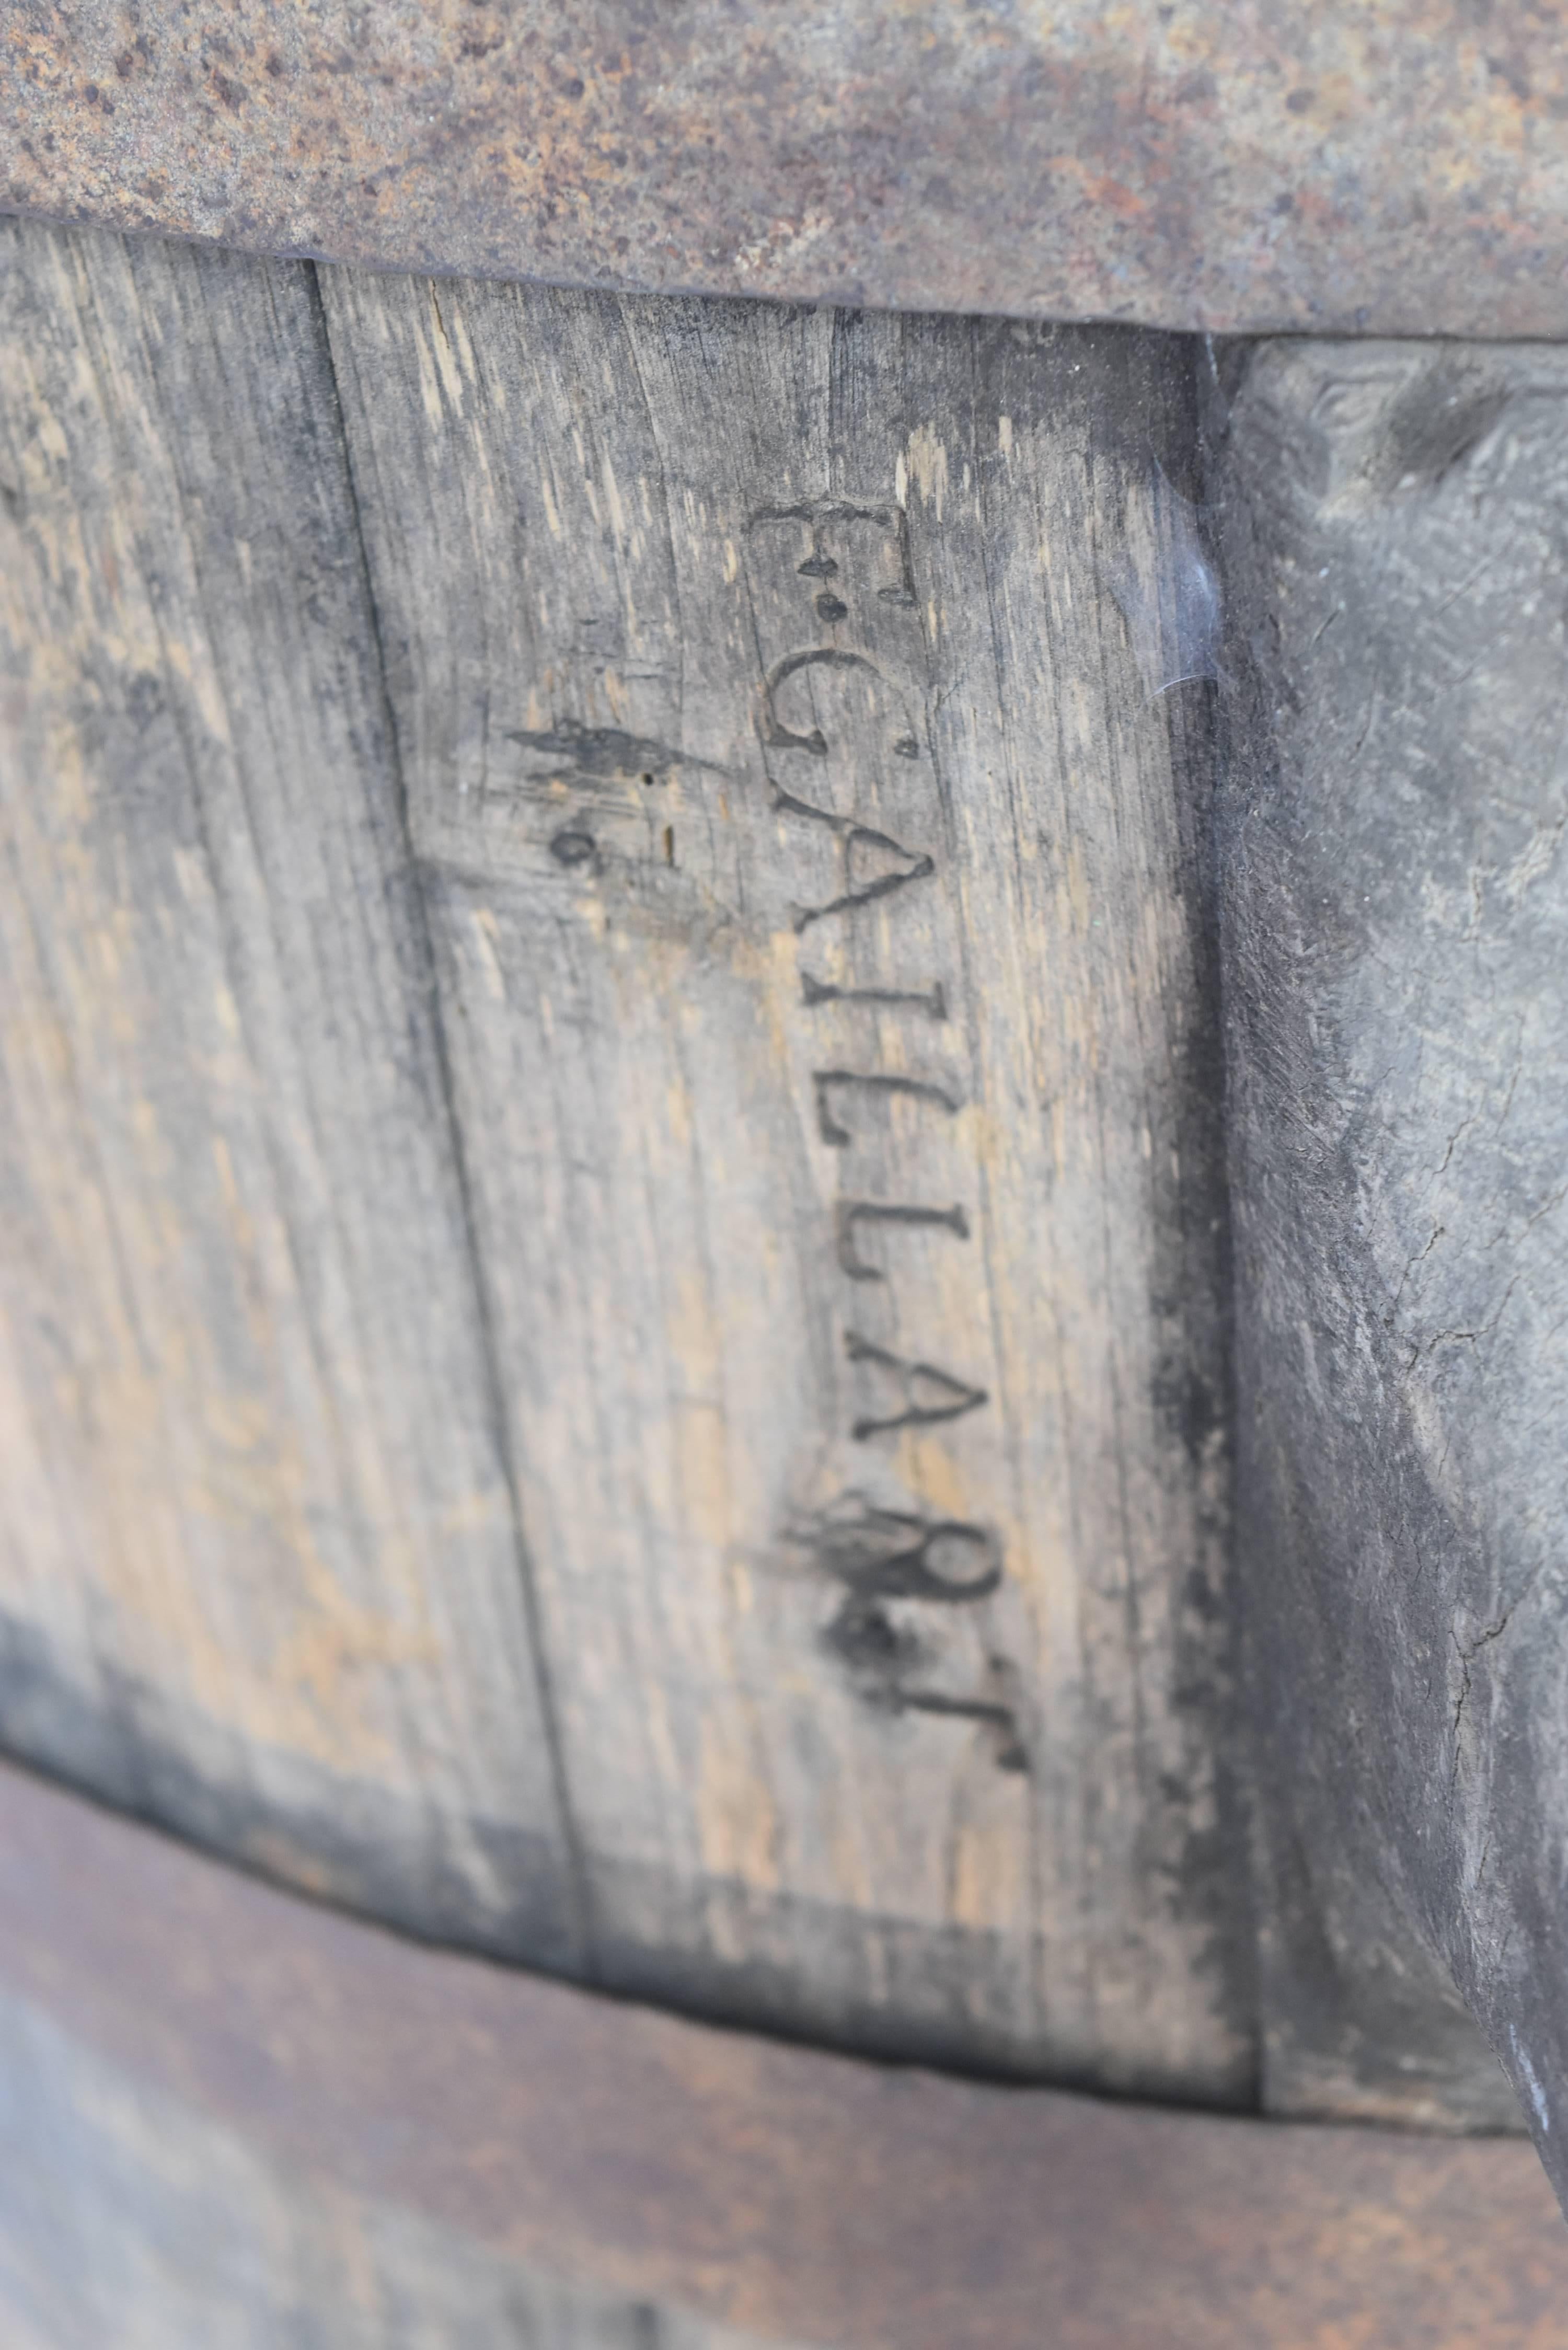 These are large-scale French wine barrels from Europe that have stamped F. Gaillart. They are wooden, have wooden handles and metal straps that hold them together. They are the perfect size for small fruit trees, or great to put a wood or marble top